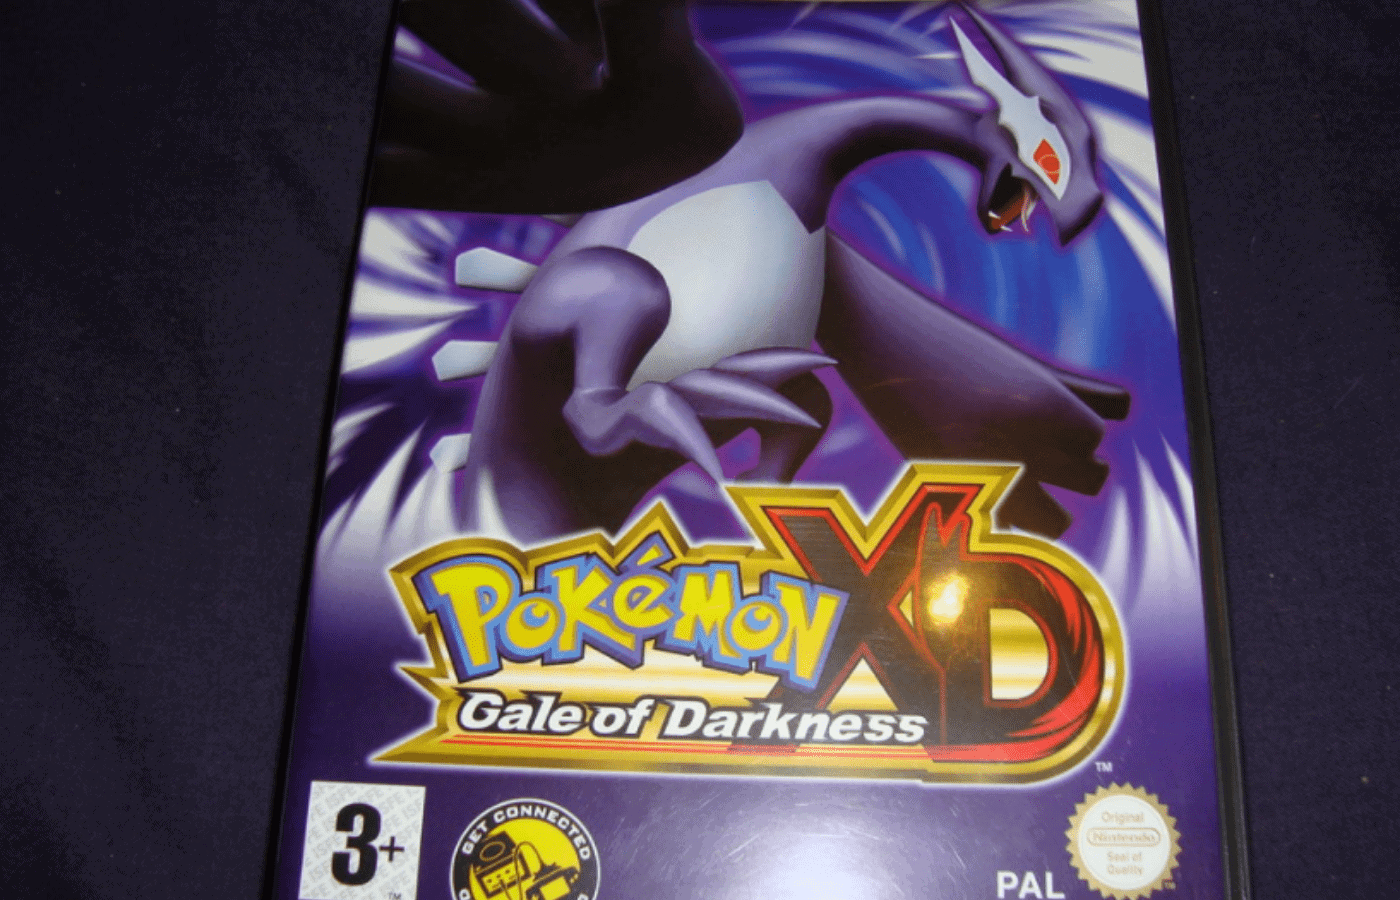 Why Is Pokemon Gale of Darkness So Expensive